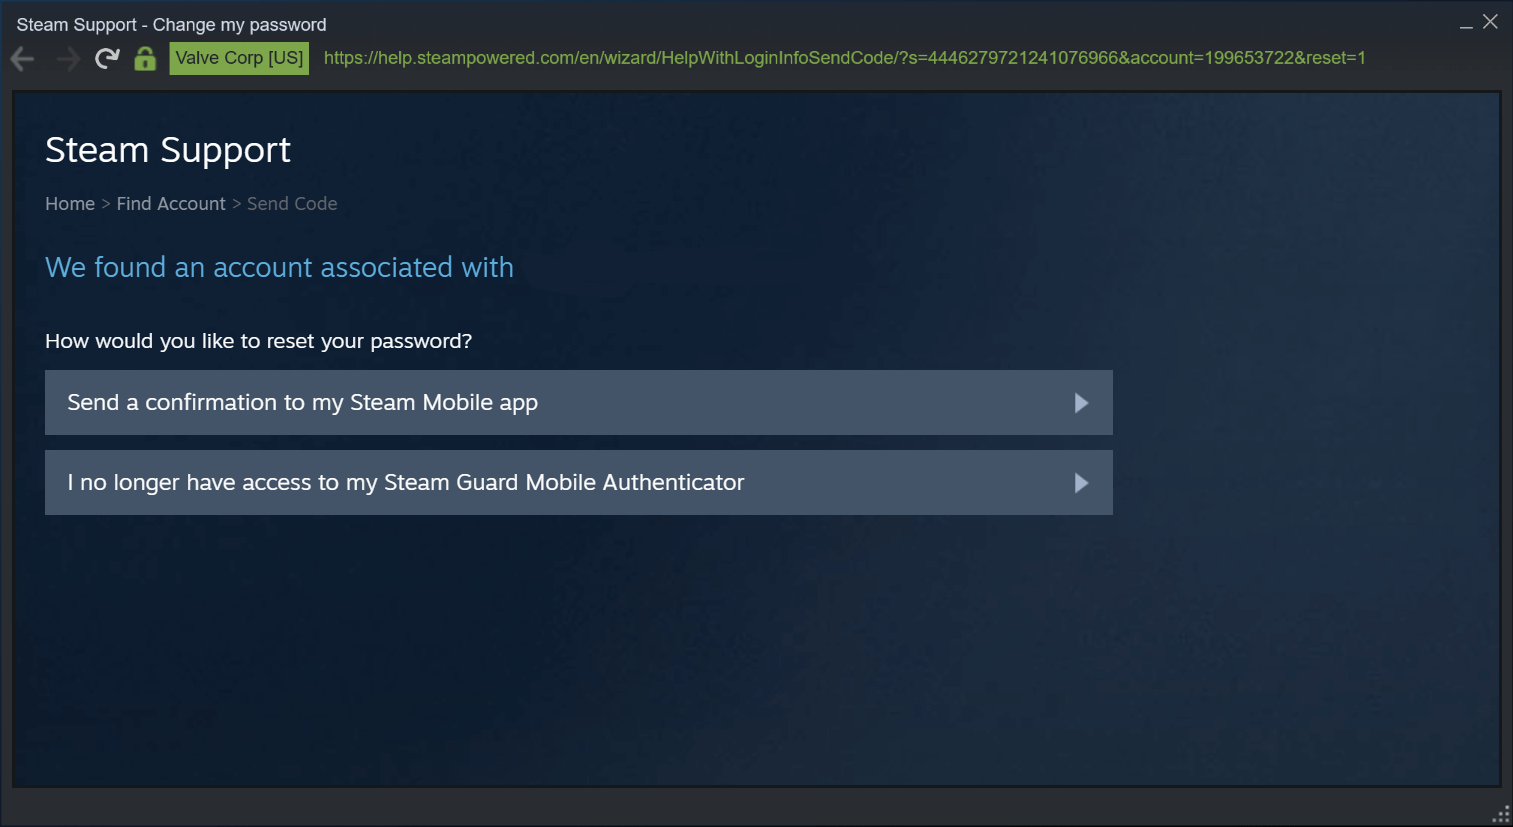 recover your steam account lost password